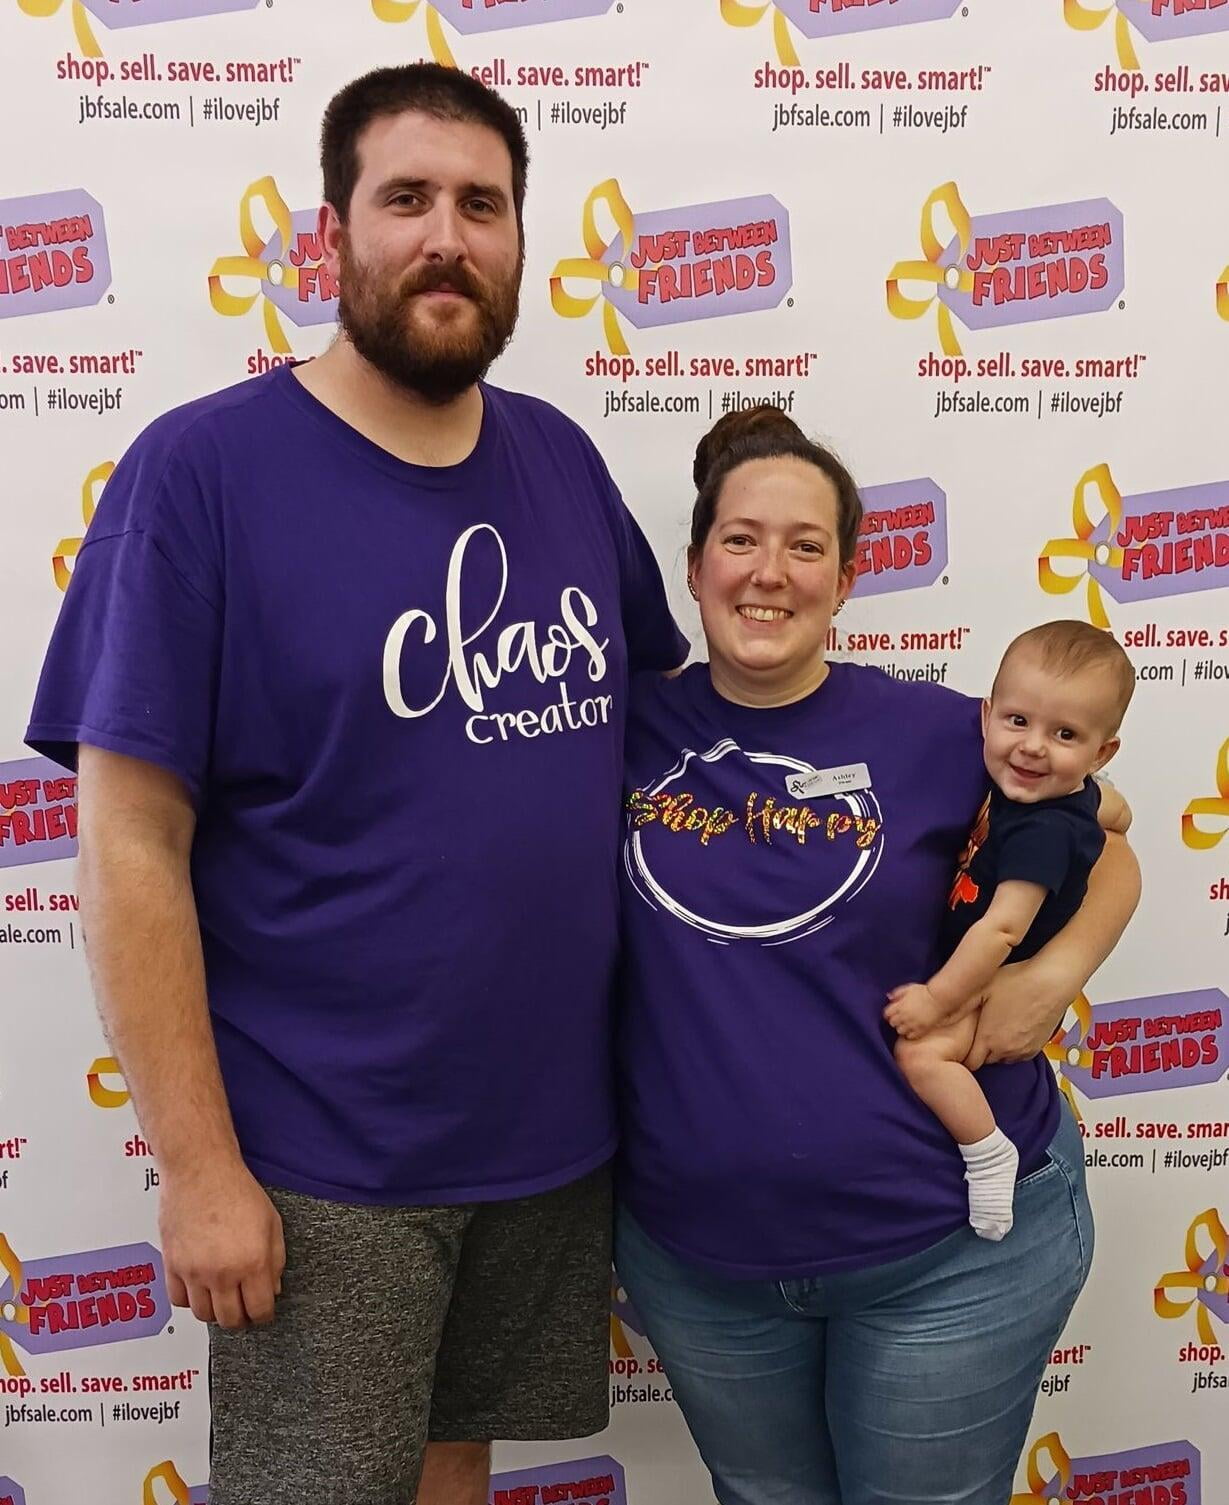 JBF Poconos owners, Kyle and Ashley Elmer, standing together with baby Owen in front of a JBF banner.